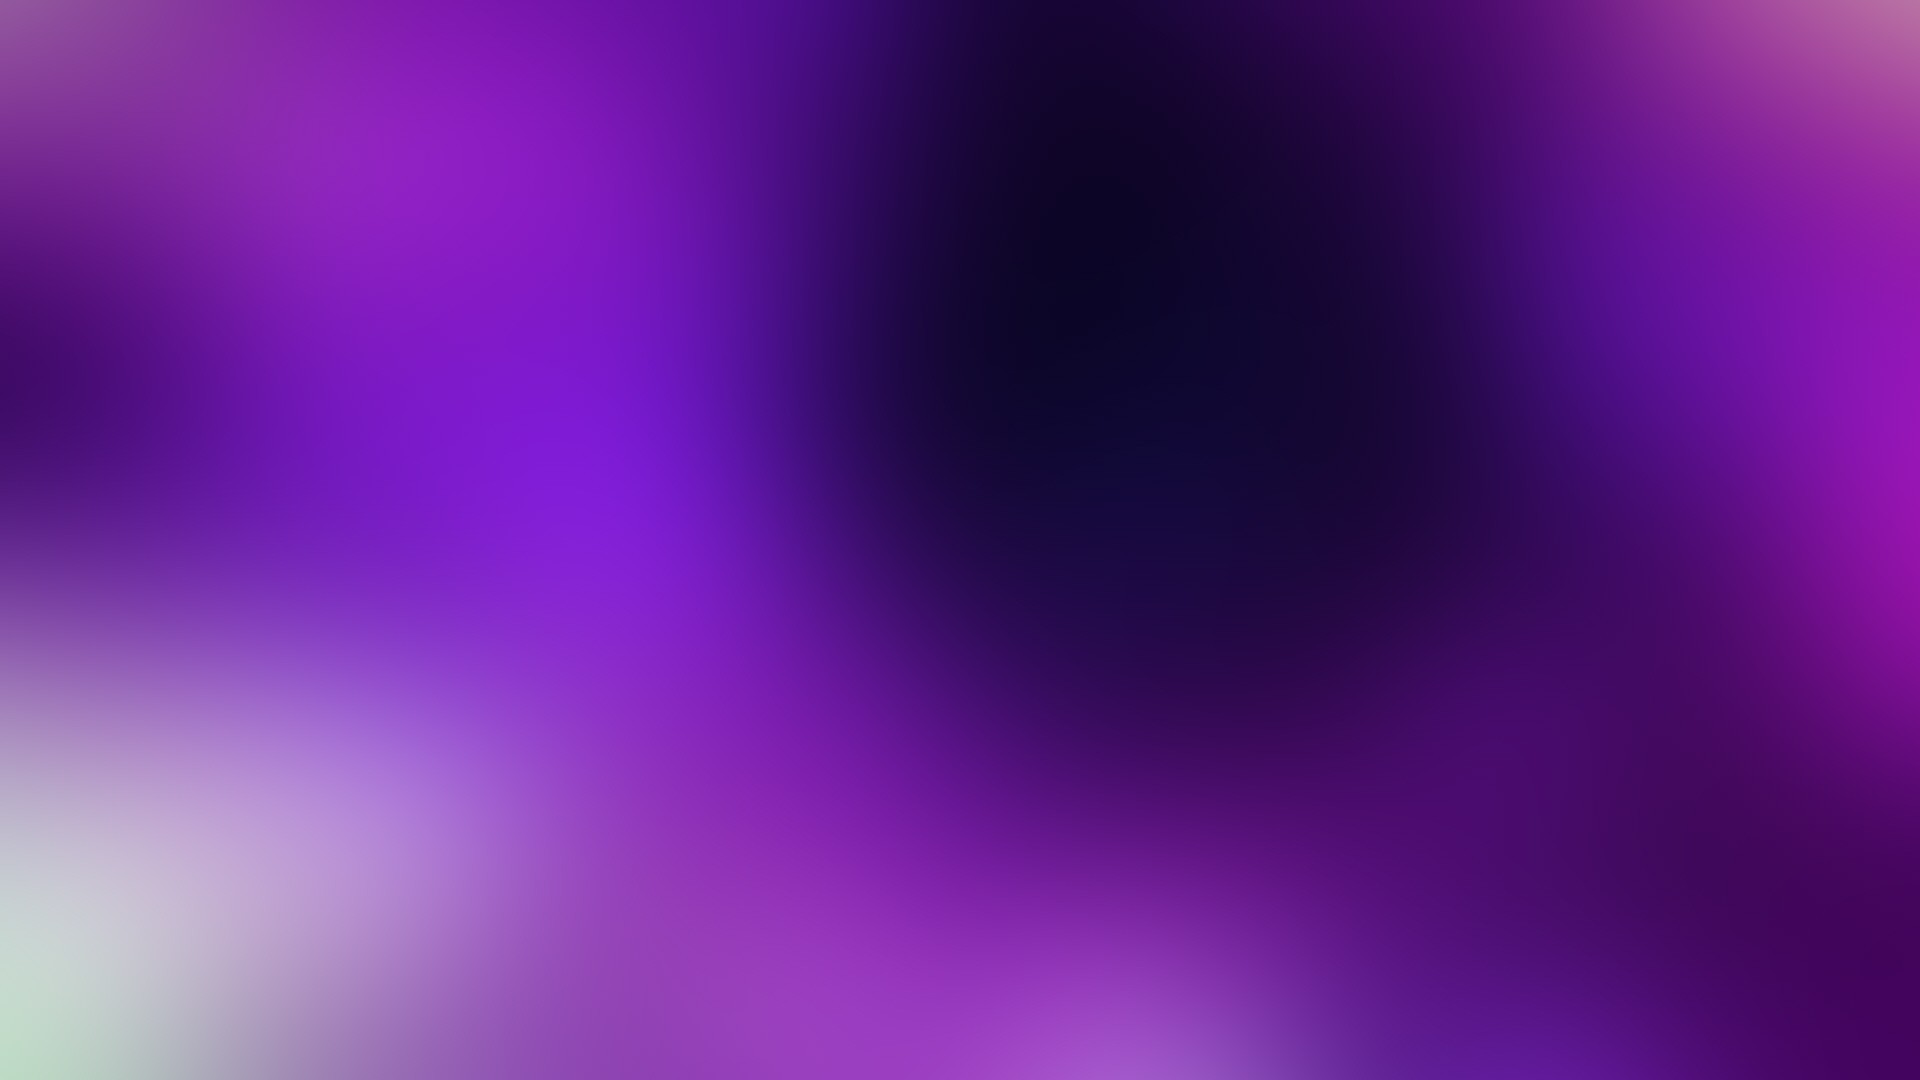 1920x1080 Purple And White Backgrounds